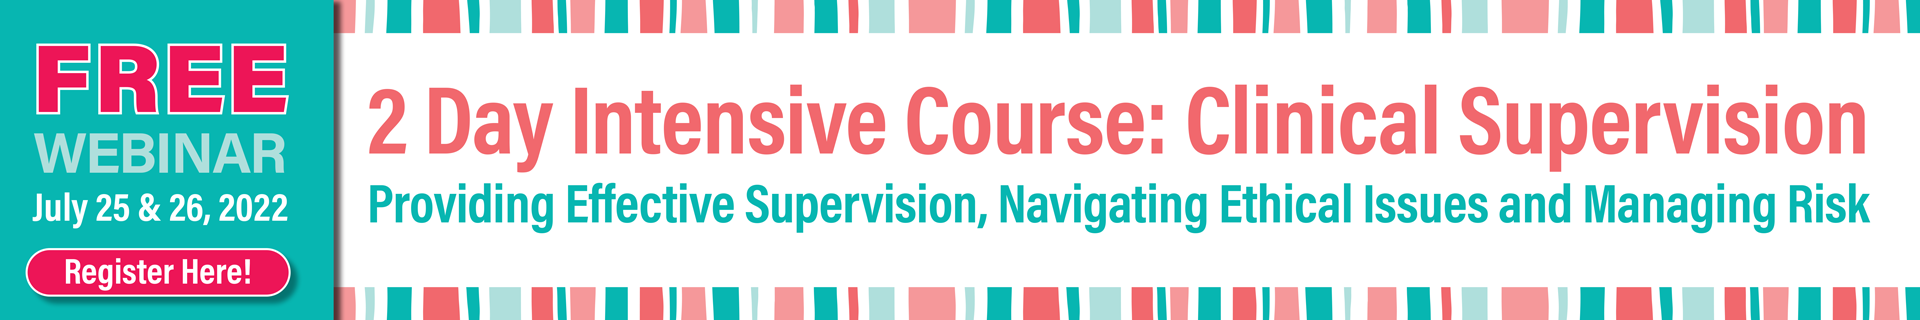 FREE 2-Day Live Virtual Intensive Course: Clinical Supervision: Providing Effective Supervision, Navigating Ethical Issues and Managing Risk